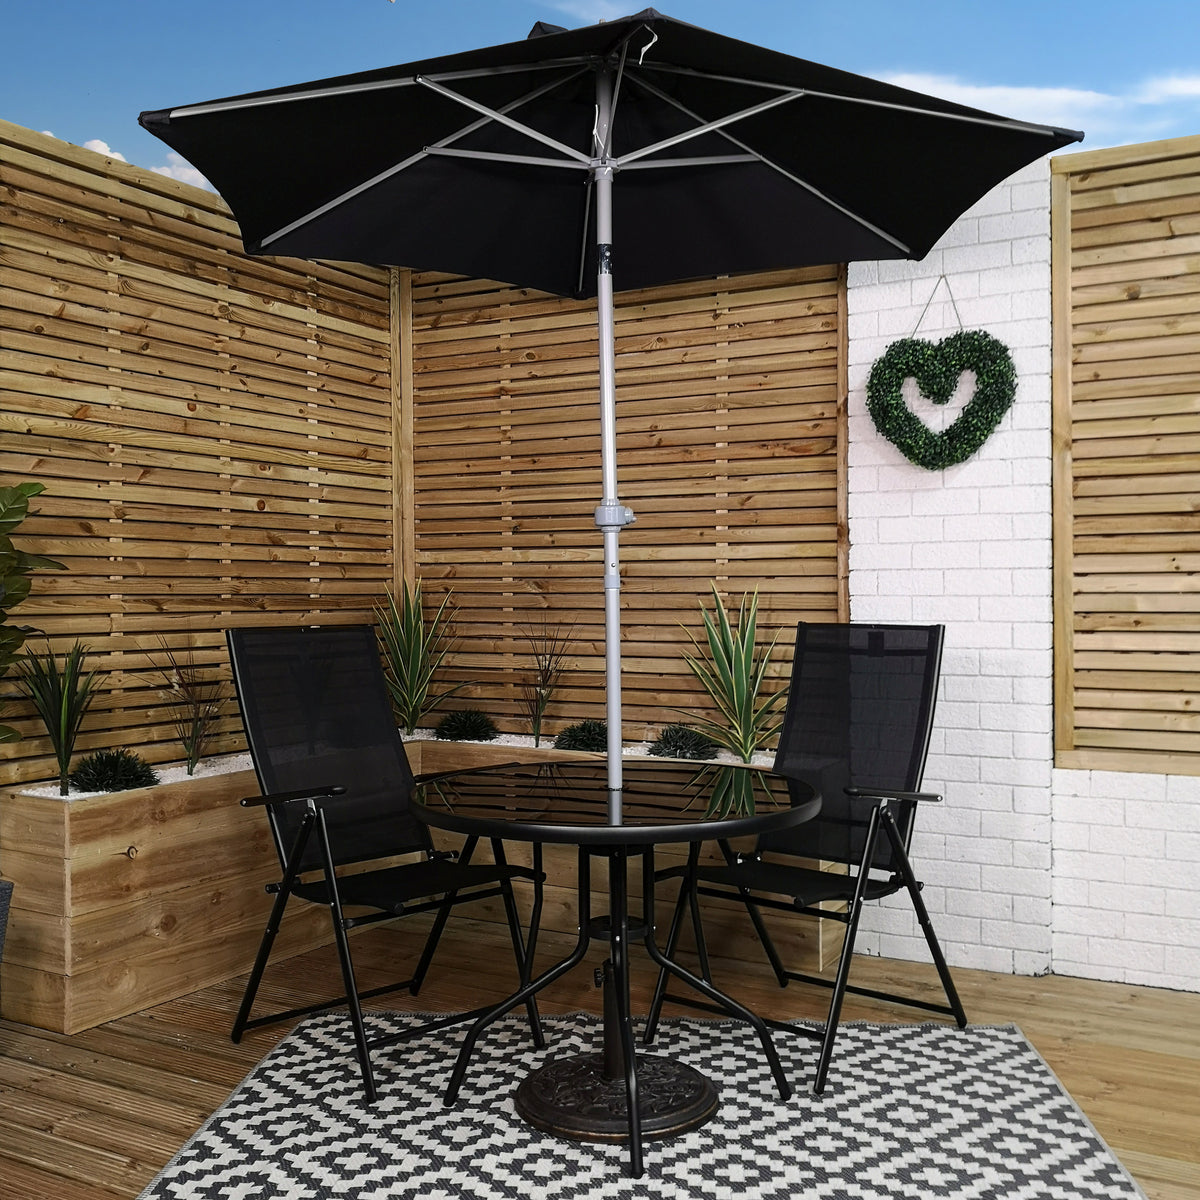 Outdoor 2 Person Round Glass Top Garden Patio Dining Table Chairs Black Parasol and Base Set